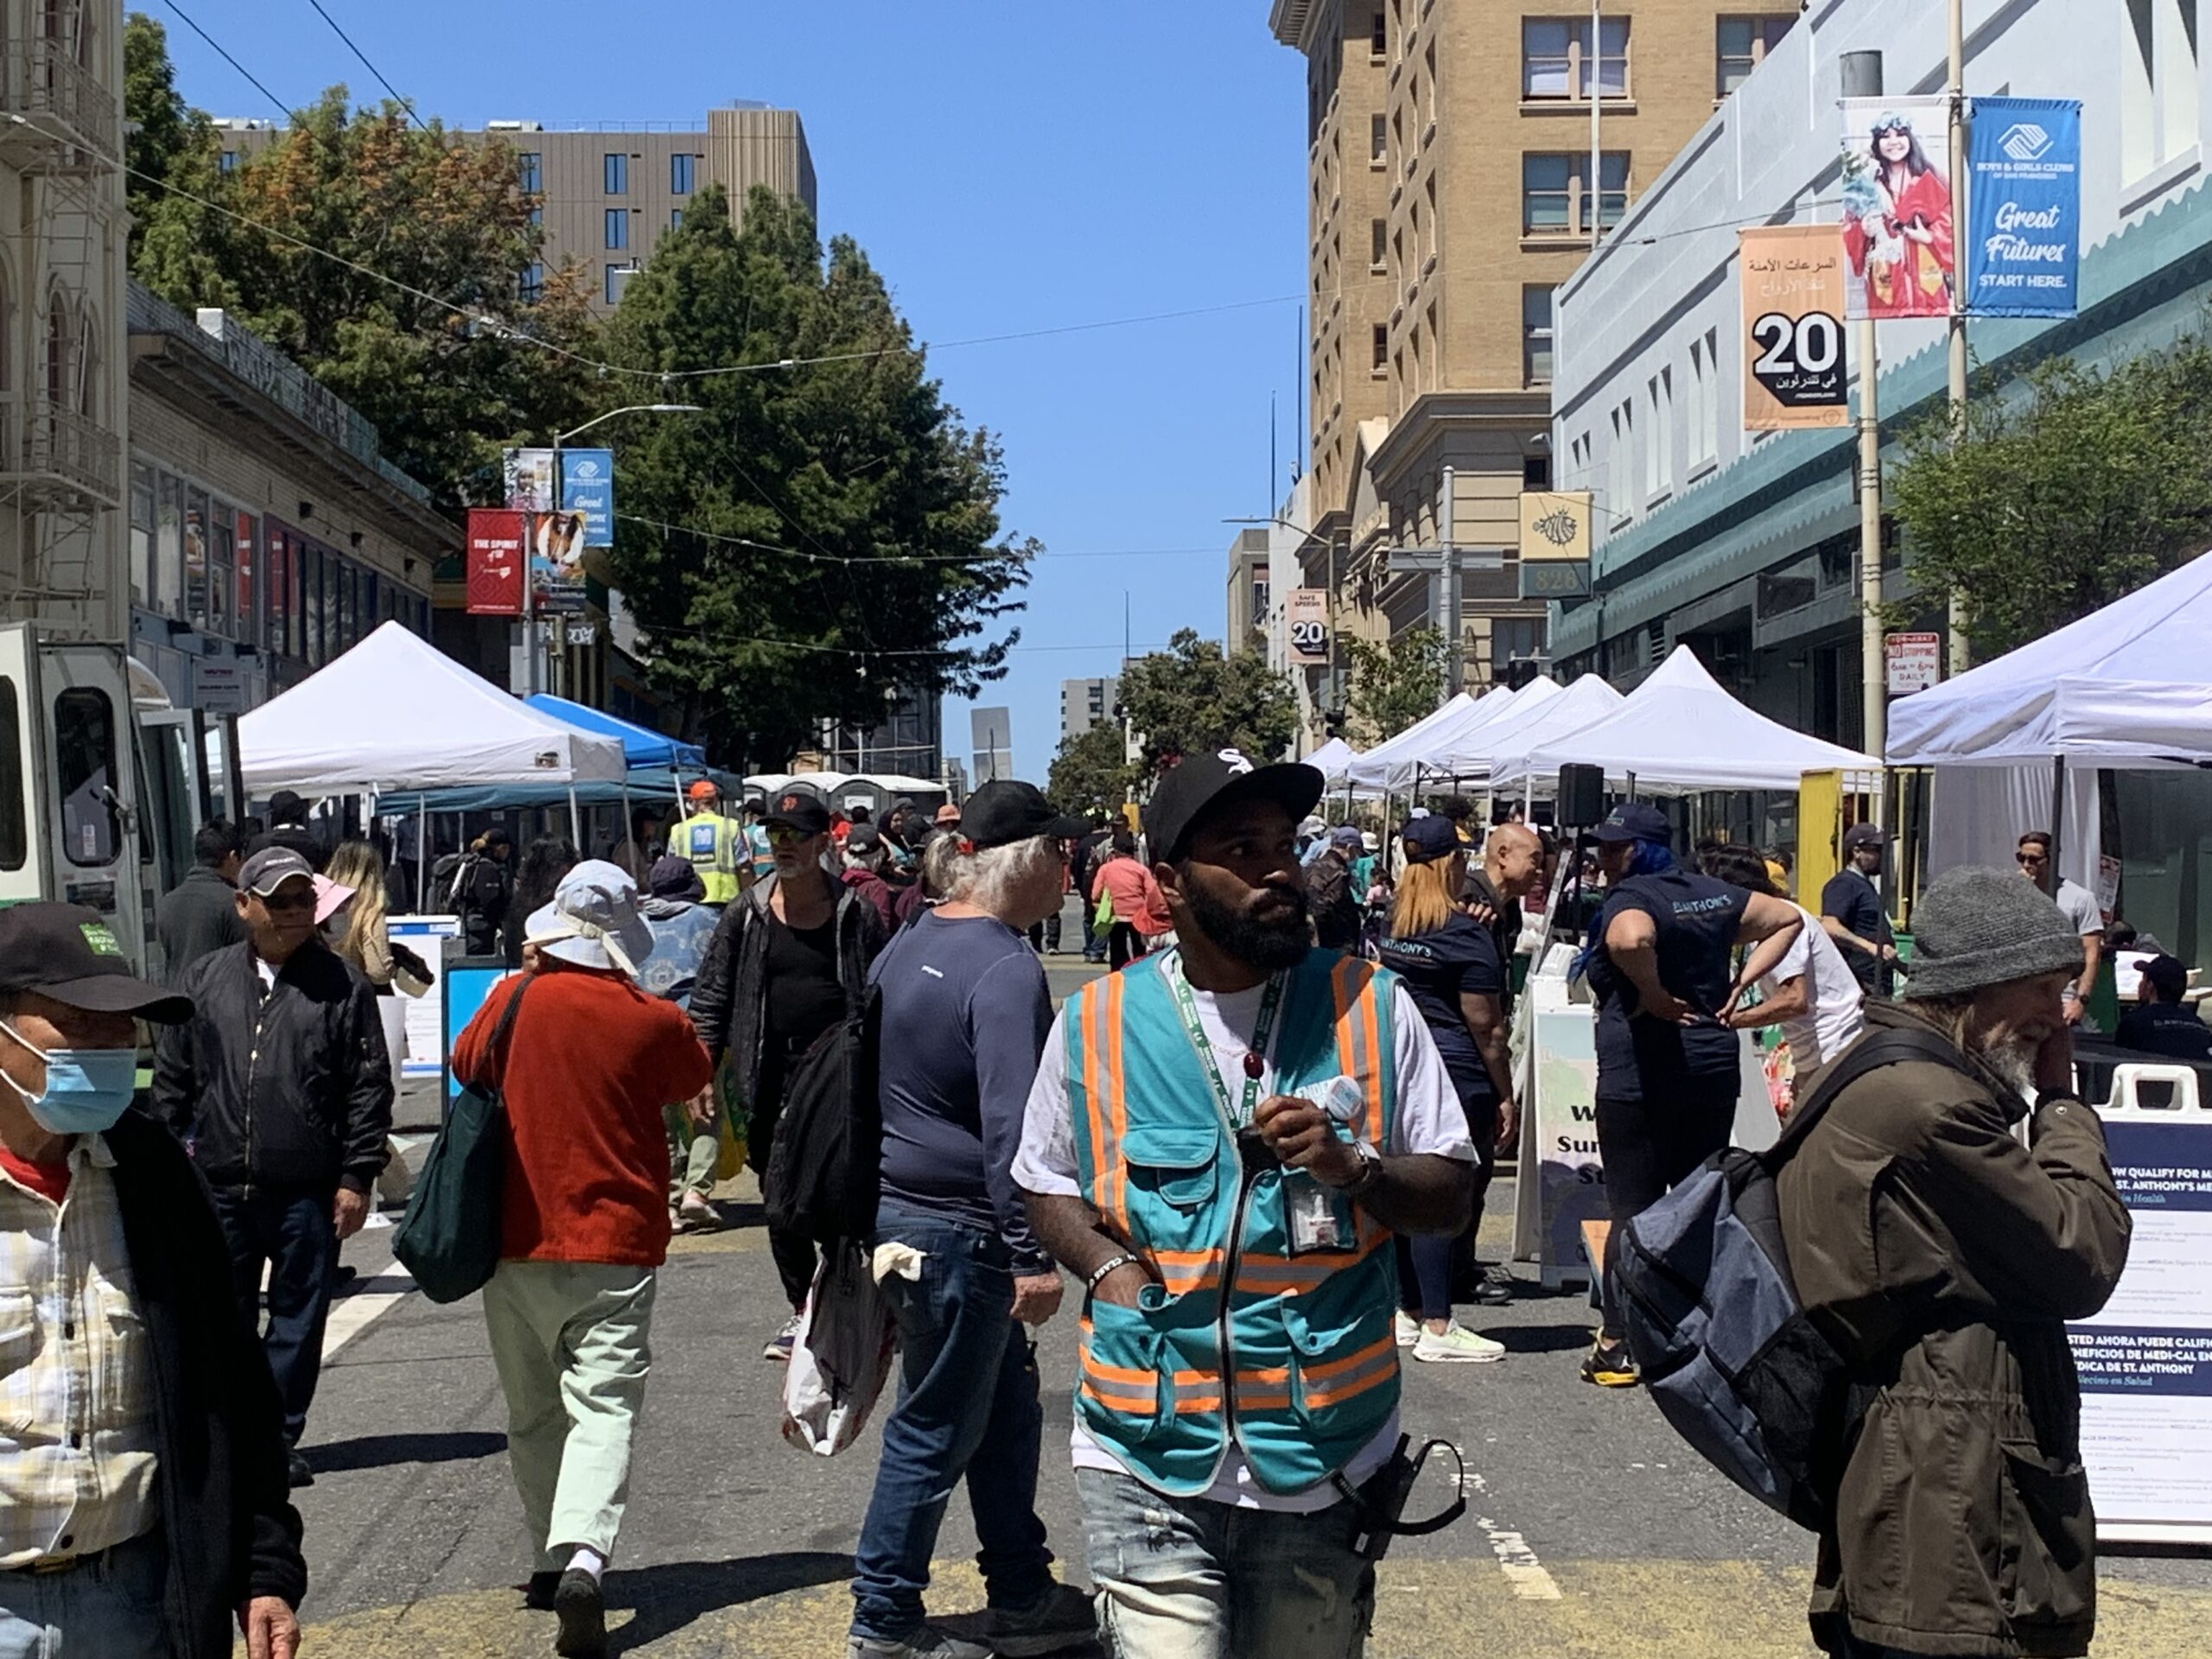 Sunday Streets: A Celebration of Community in the Tenderloin